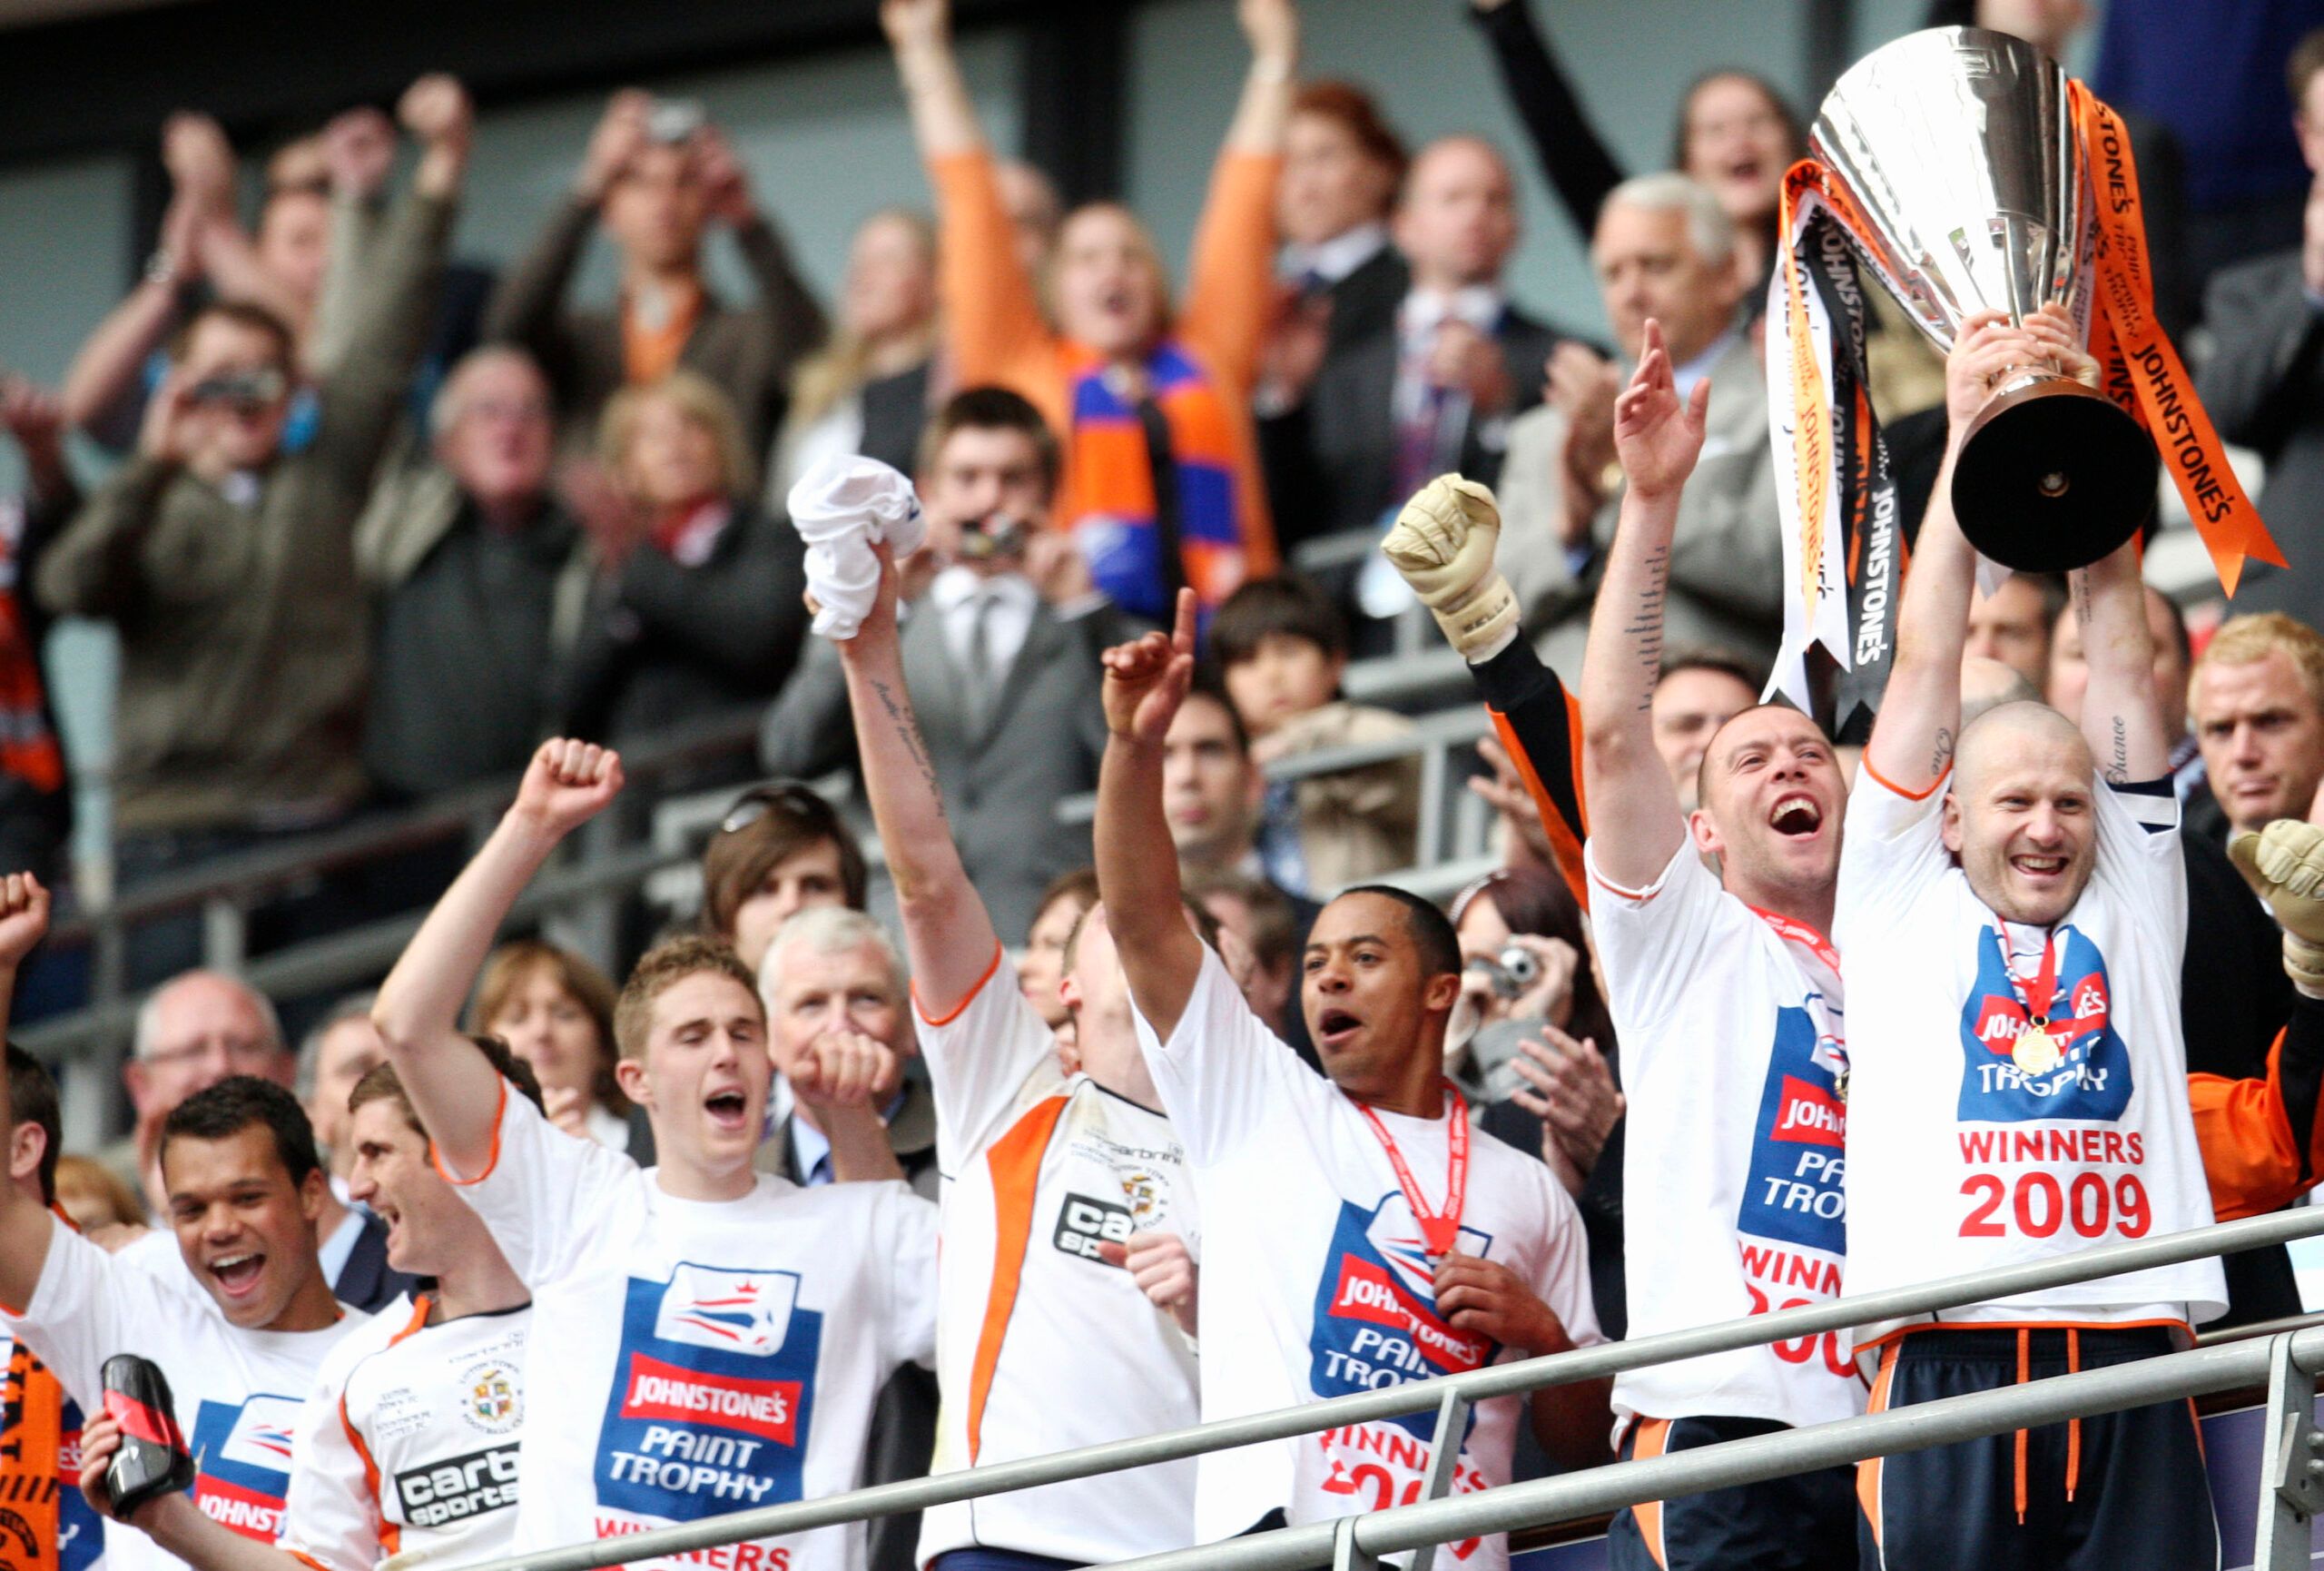 Football - Luton Town v Scunthorpe United - Johnstone's Paint Trophy Final - Wembley Stadium - 08/09 - 5/4/09 
Kevin Nicholls lifts the trophy as Luton Town celebrate victory 
Mandatory Credit: Action Images / Andrew Couldridge